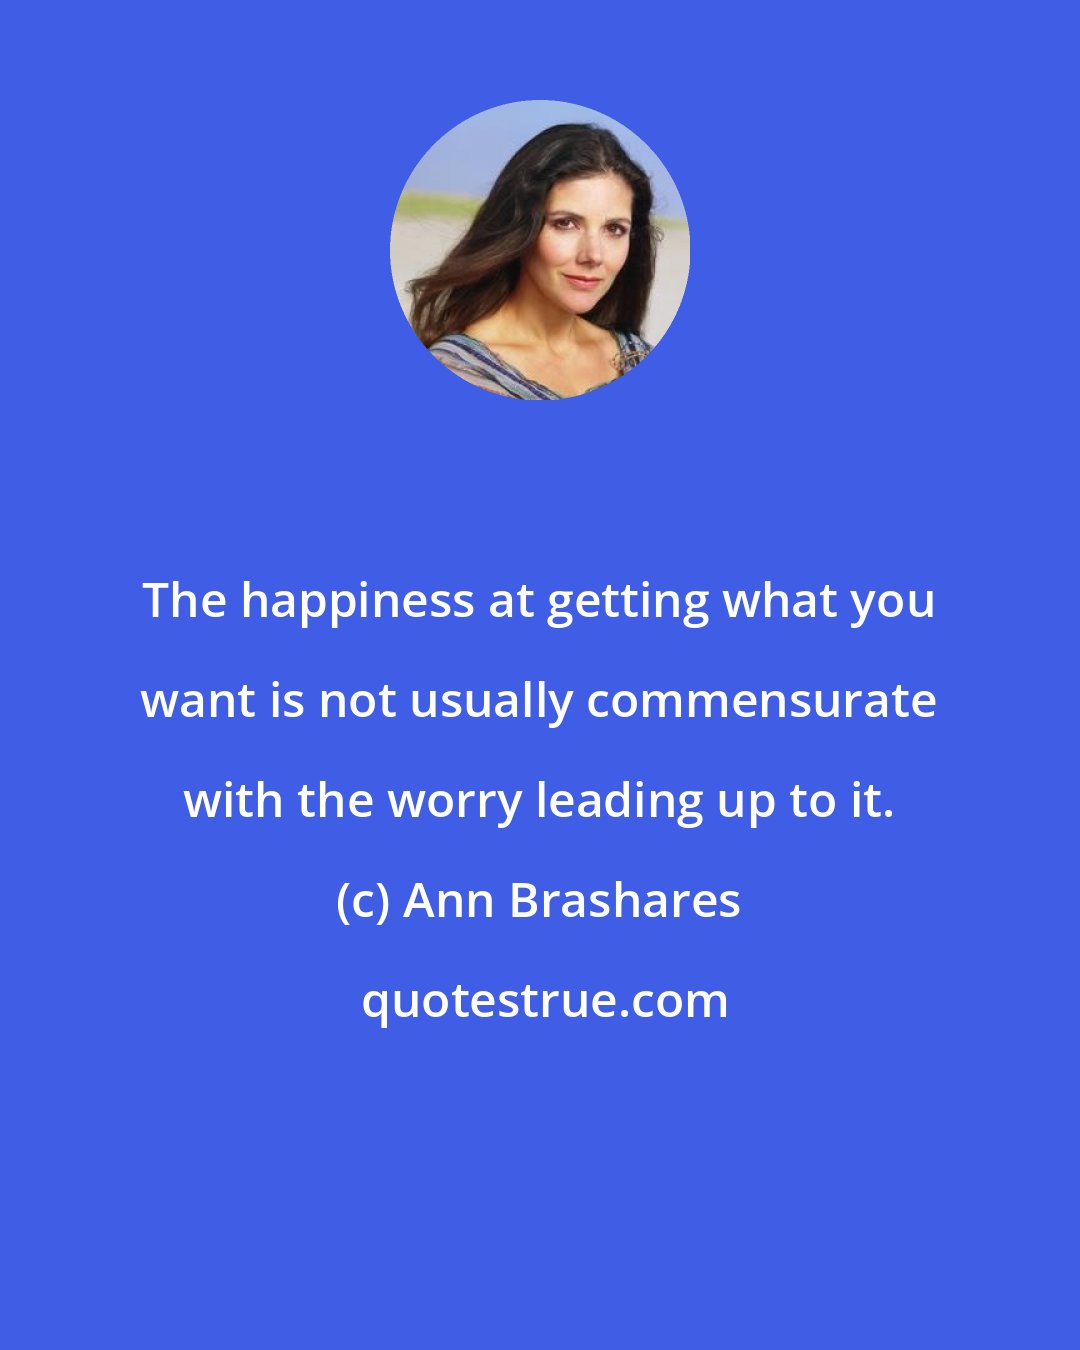 Ann Brashares: The happiness at getting what you want is not usually commensurate with the worry leading up to it.